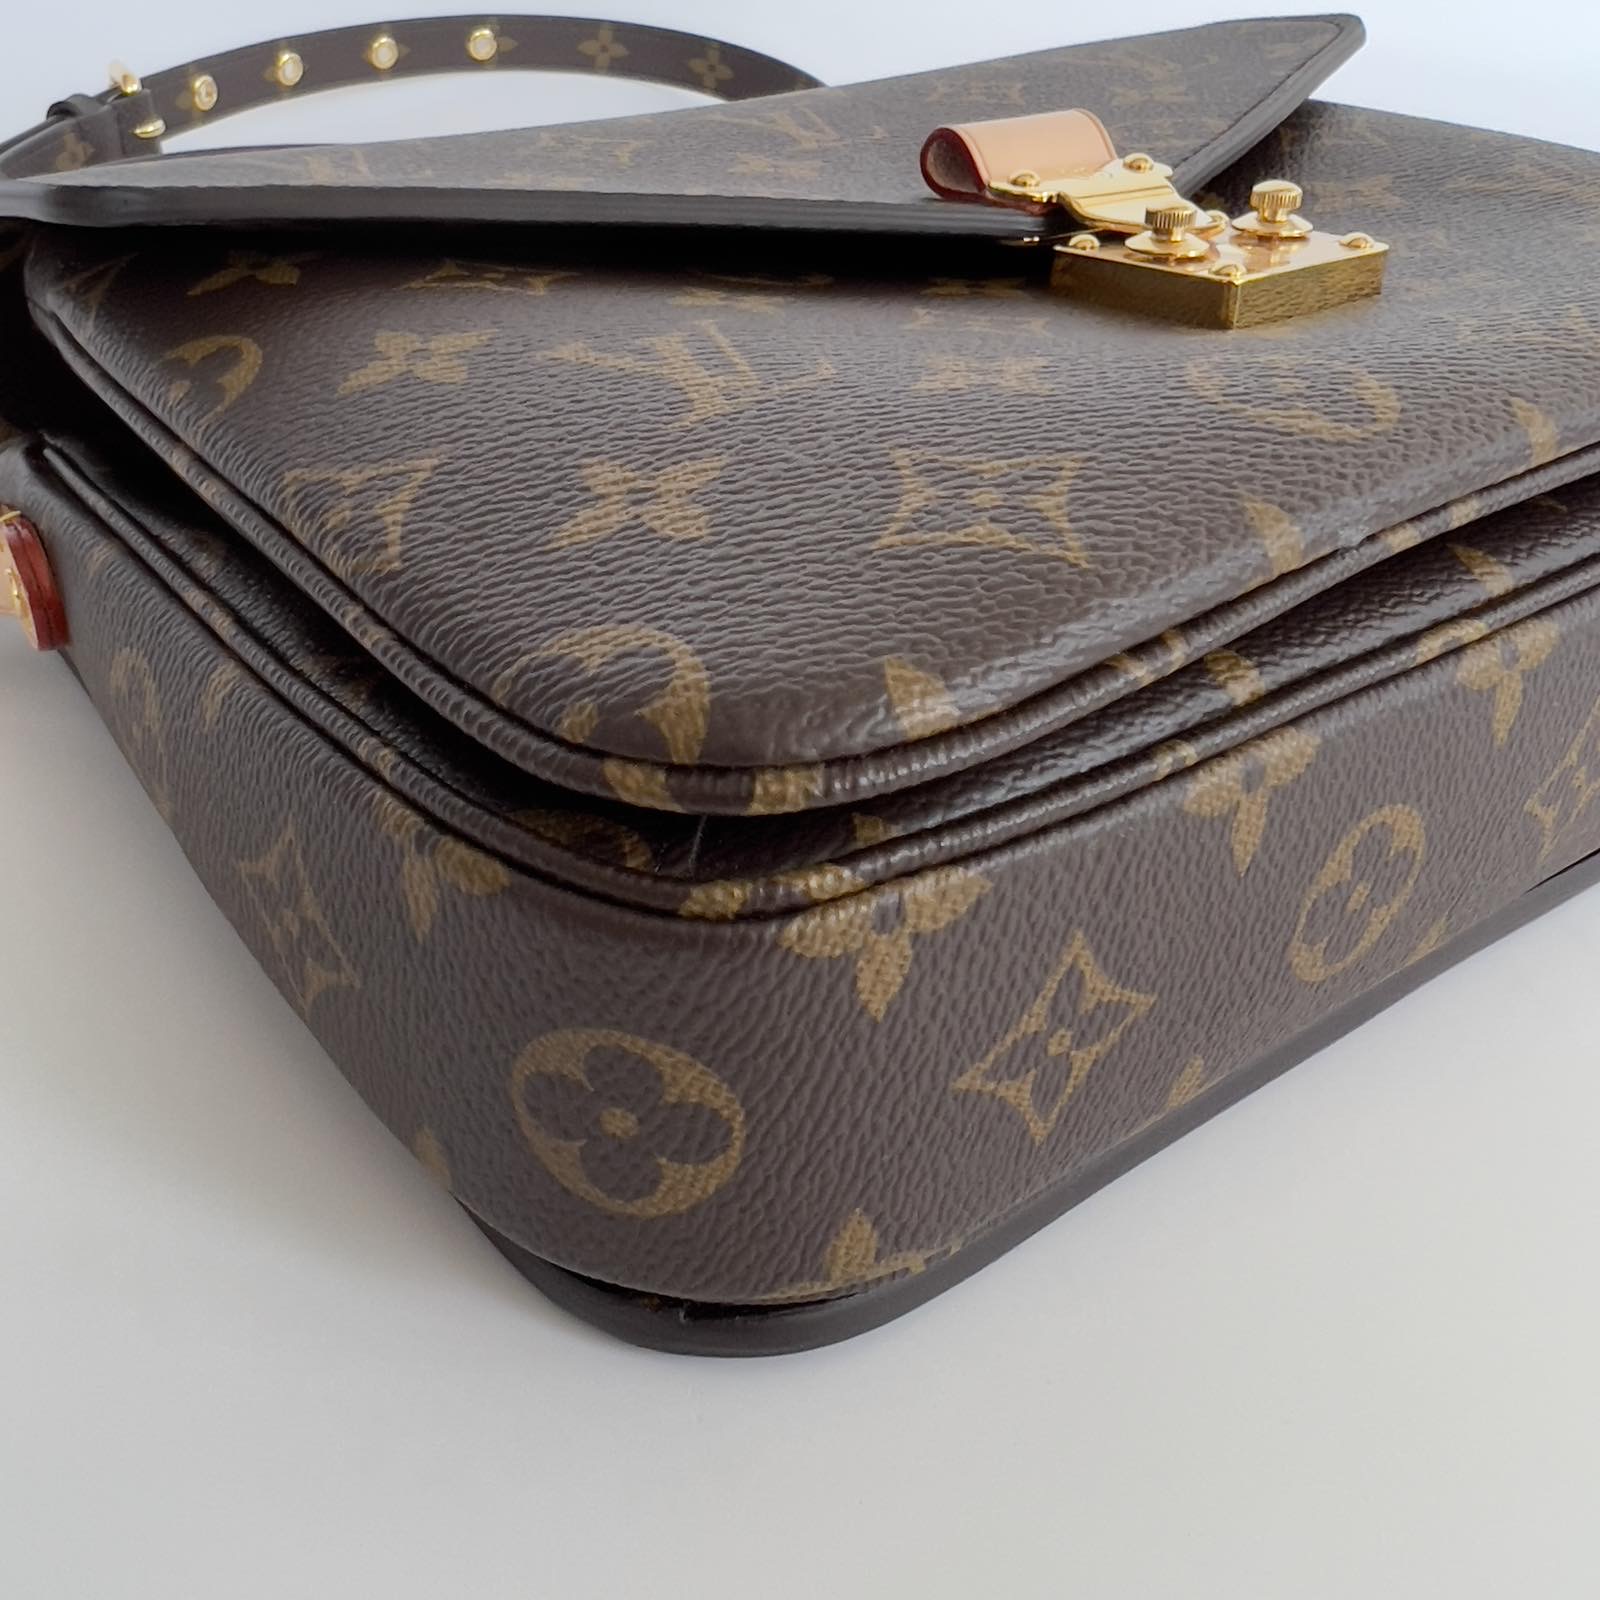 SOLD/LAYAWAY💕 Louis Vuitton Monogram Canvas Metis. Microchip. Made in  Italy. With dustbag, box, paperbag & certificate of authenticity from  ENTRUPY ❤️ - Canon E-Bags Prime